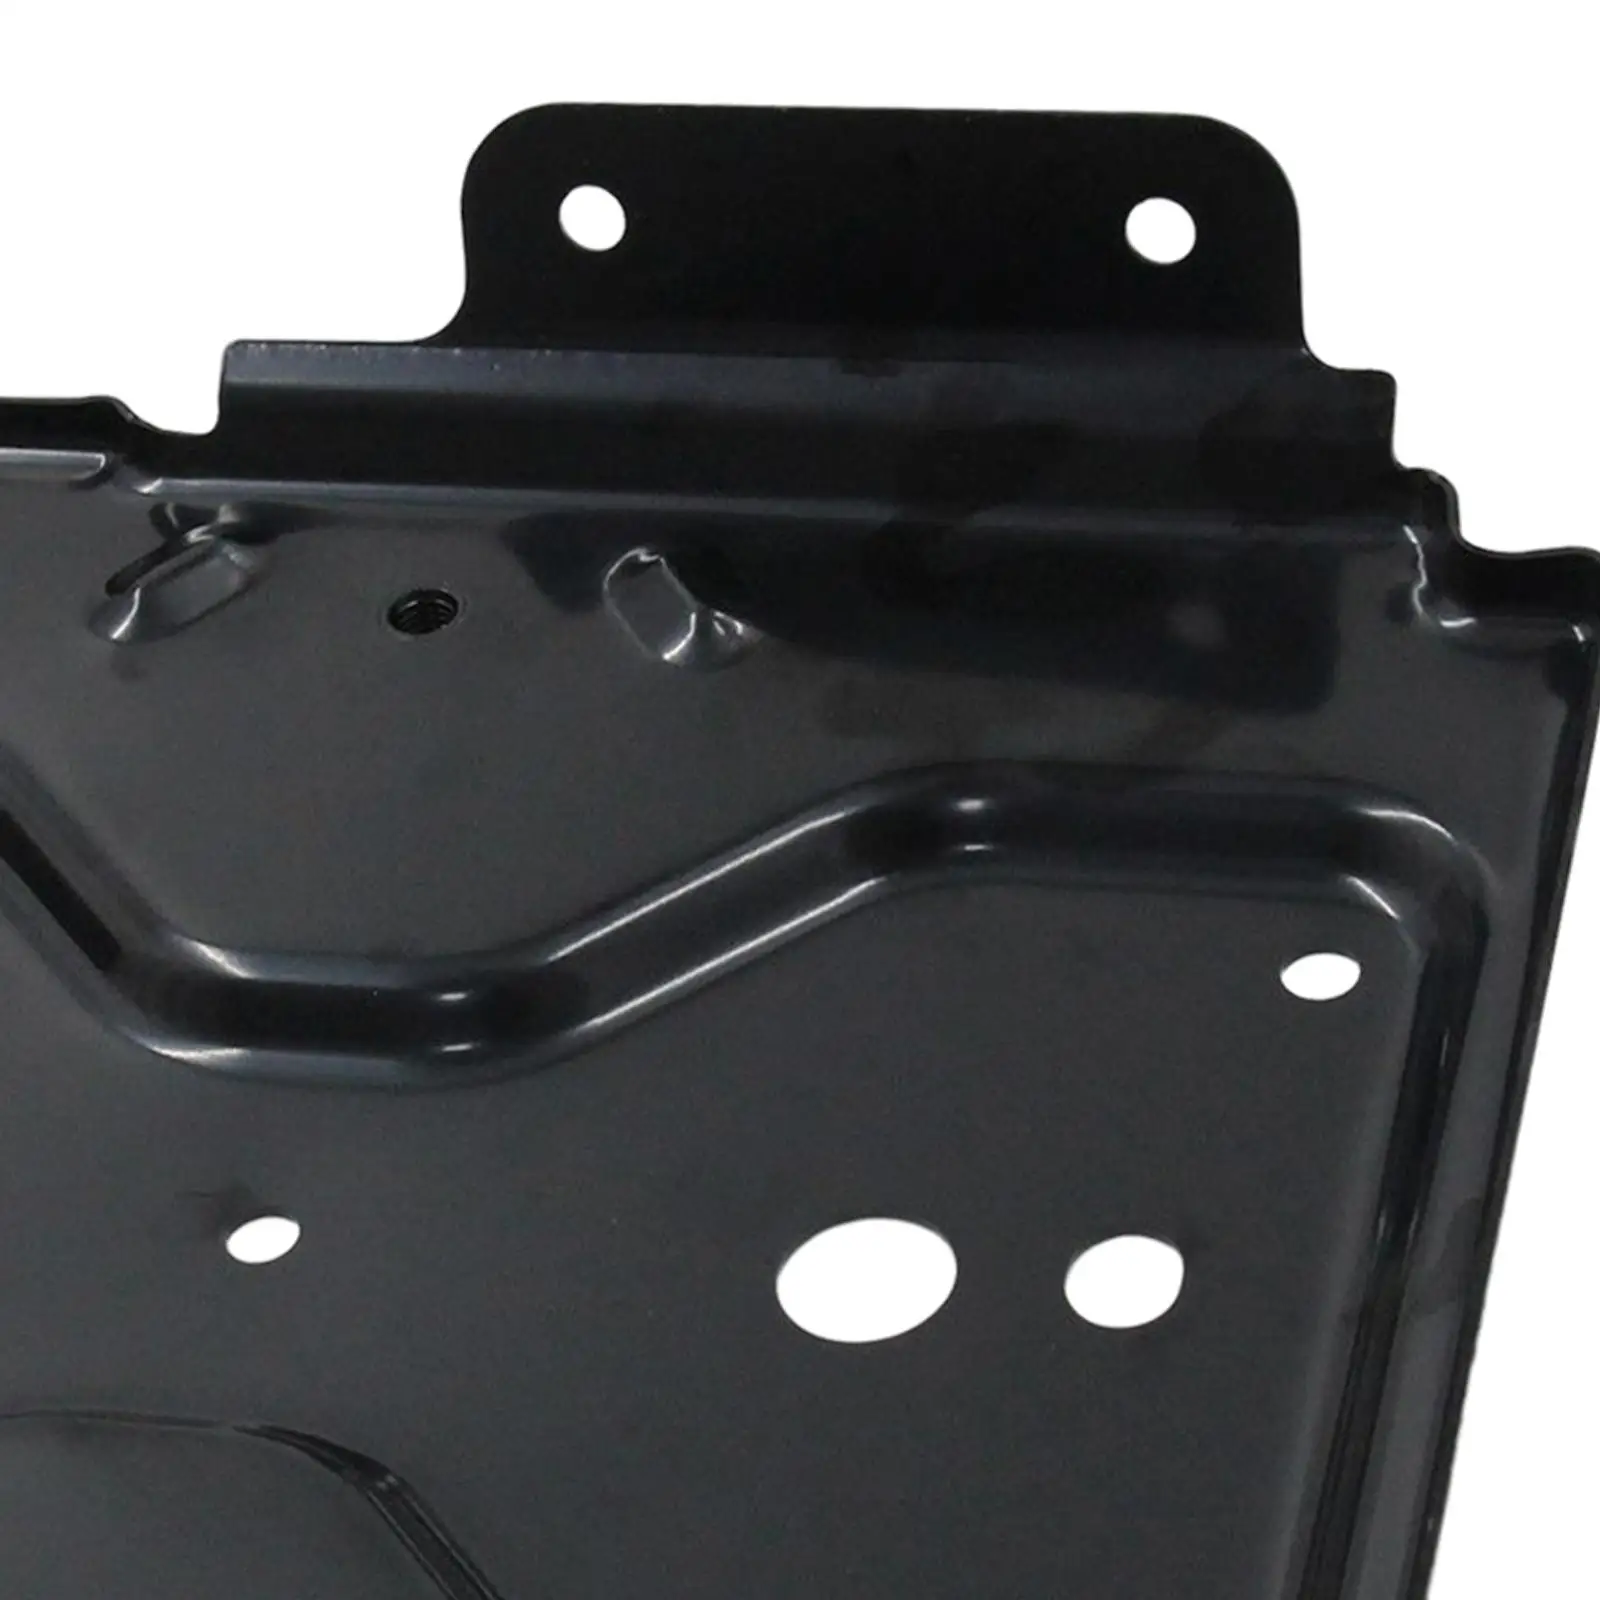 Driver Side Battery Tray High Performance Easy to Install Premium Spare Parts Car Accessories for Chevrolet Silverado 1500